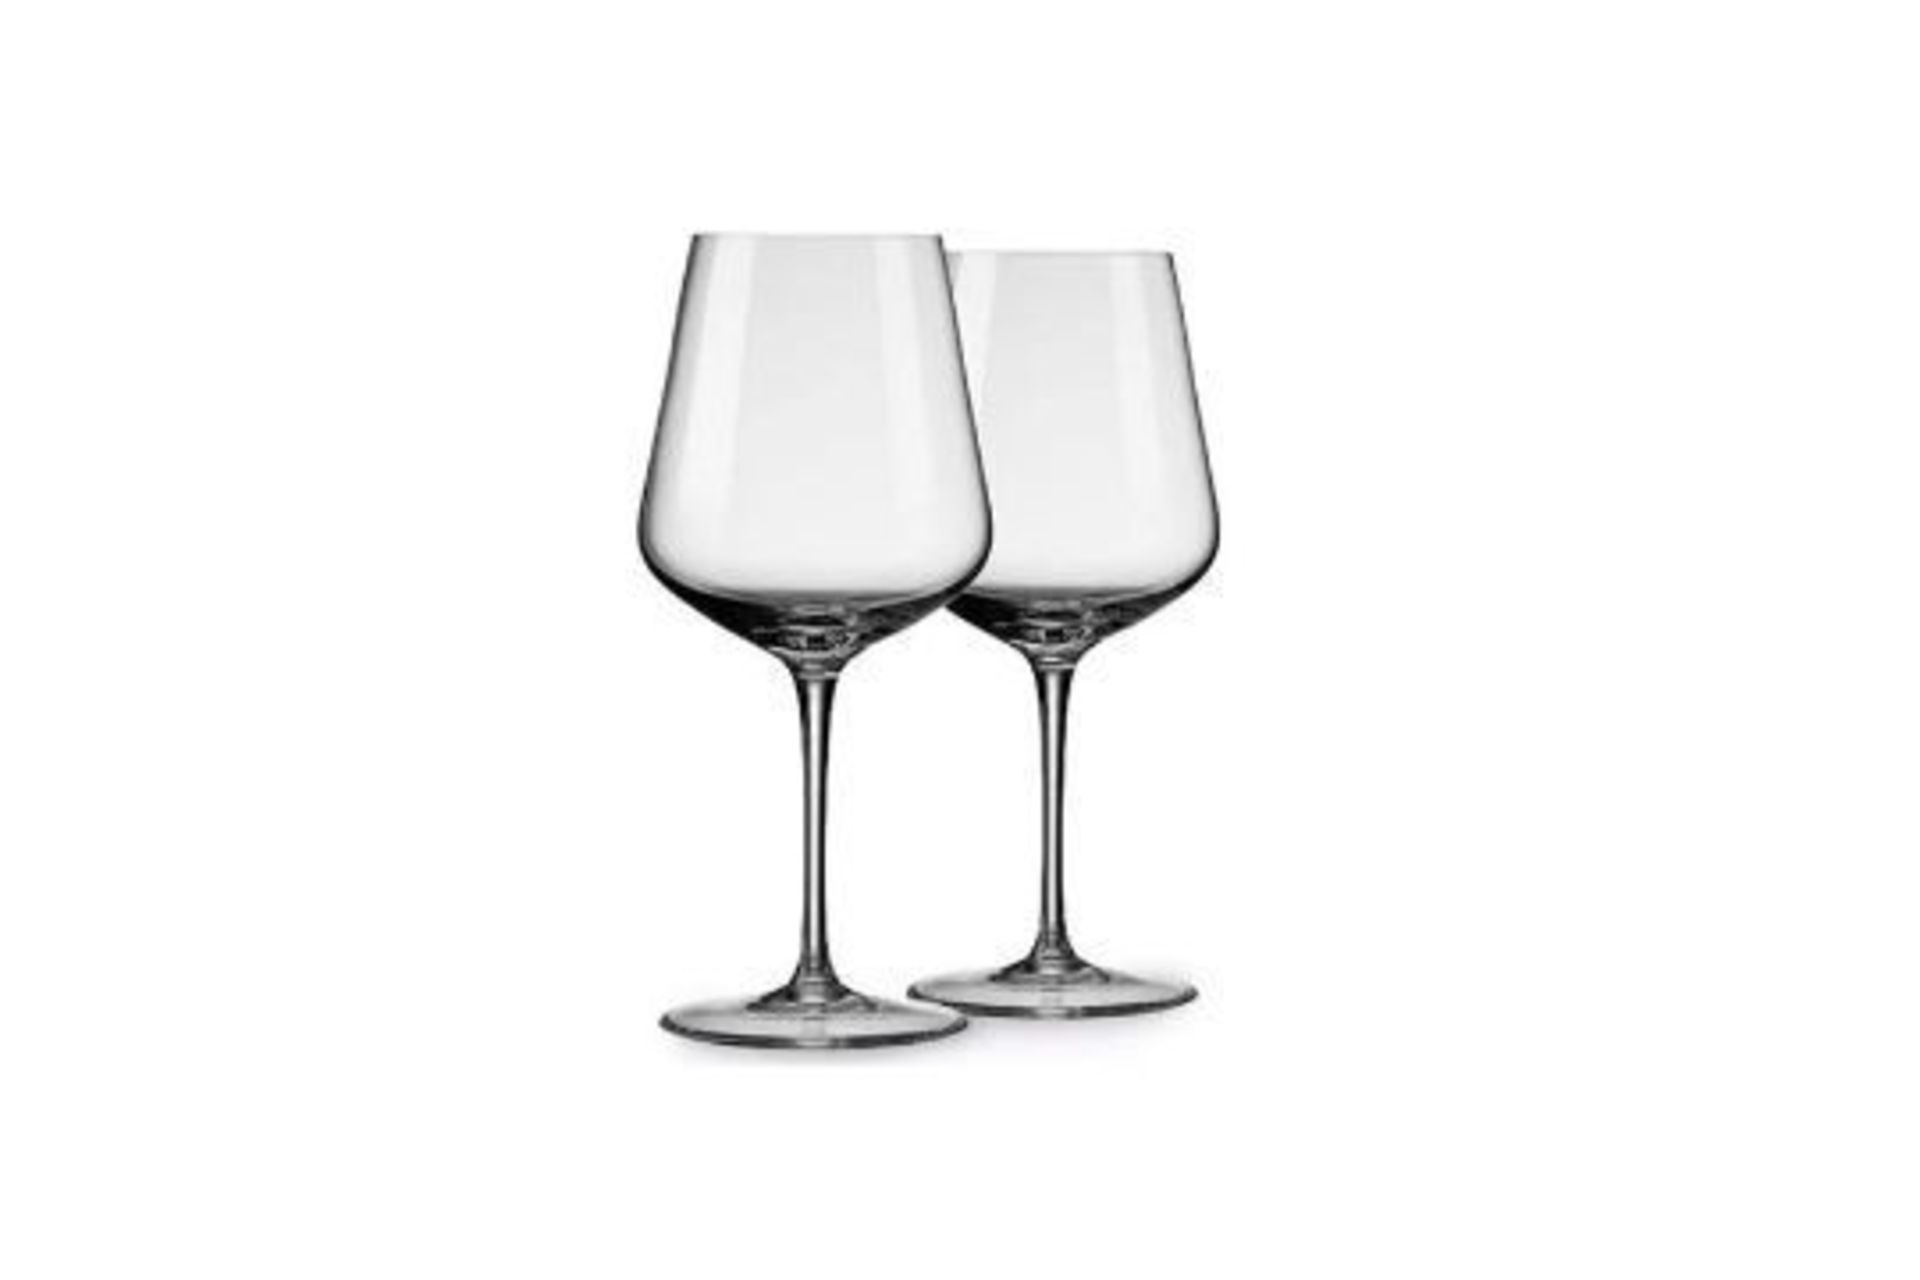 New Villeroy & Boch Set Of 2 Red Wine Glasses - RRP £19.99. - Image 2 of 2